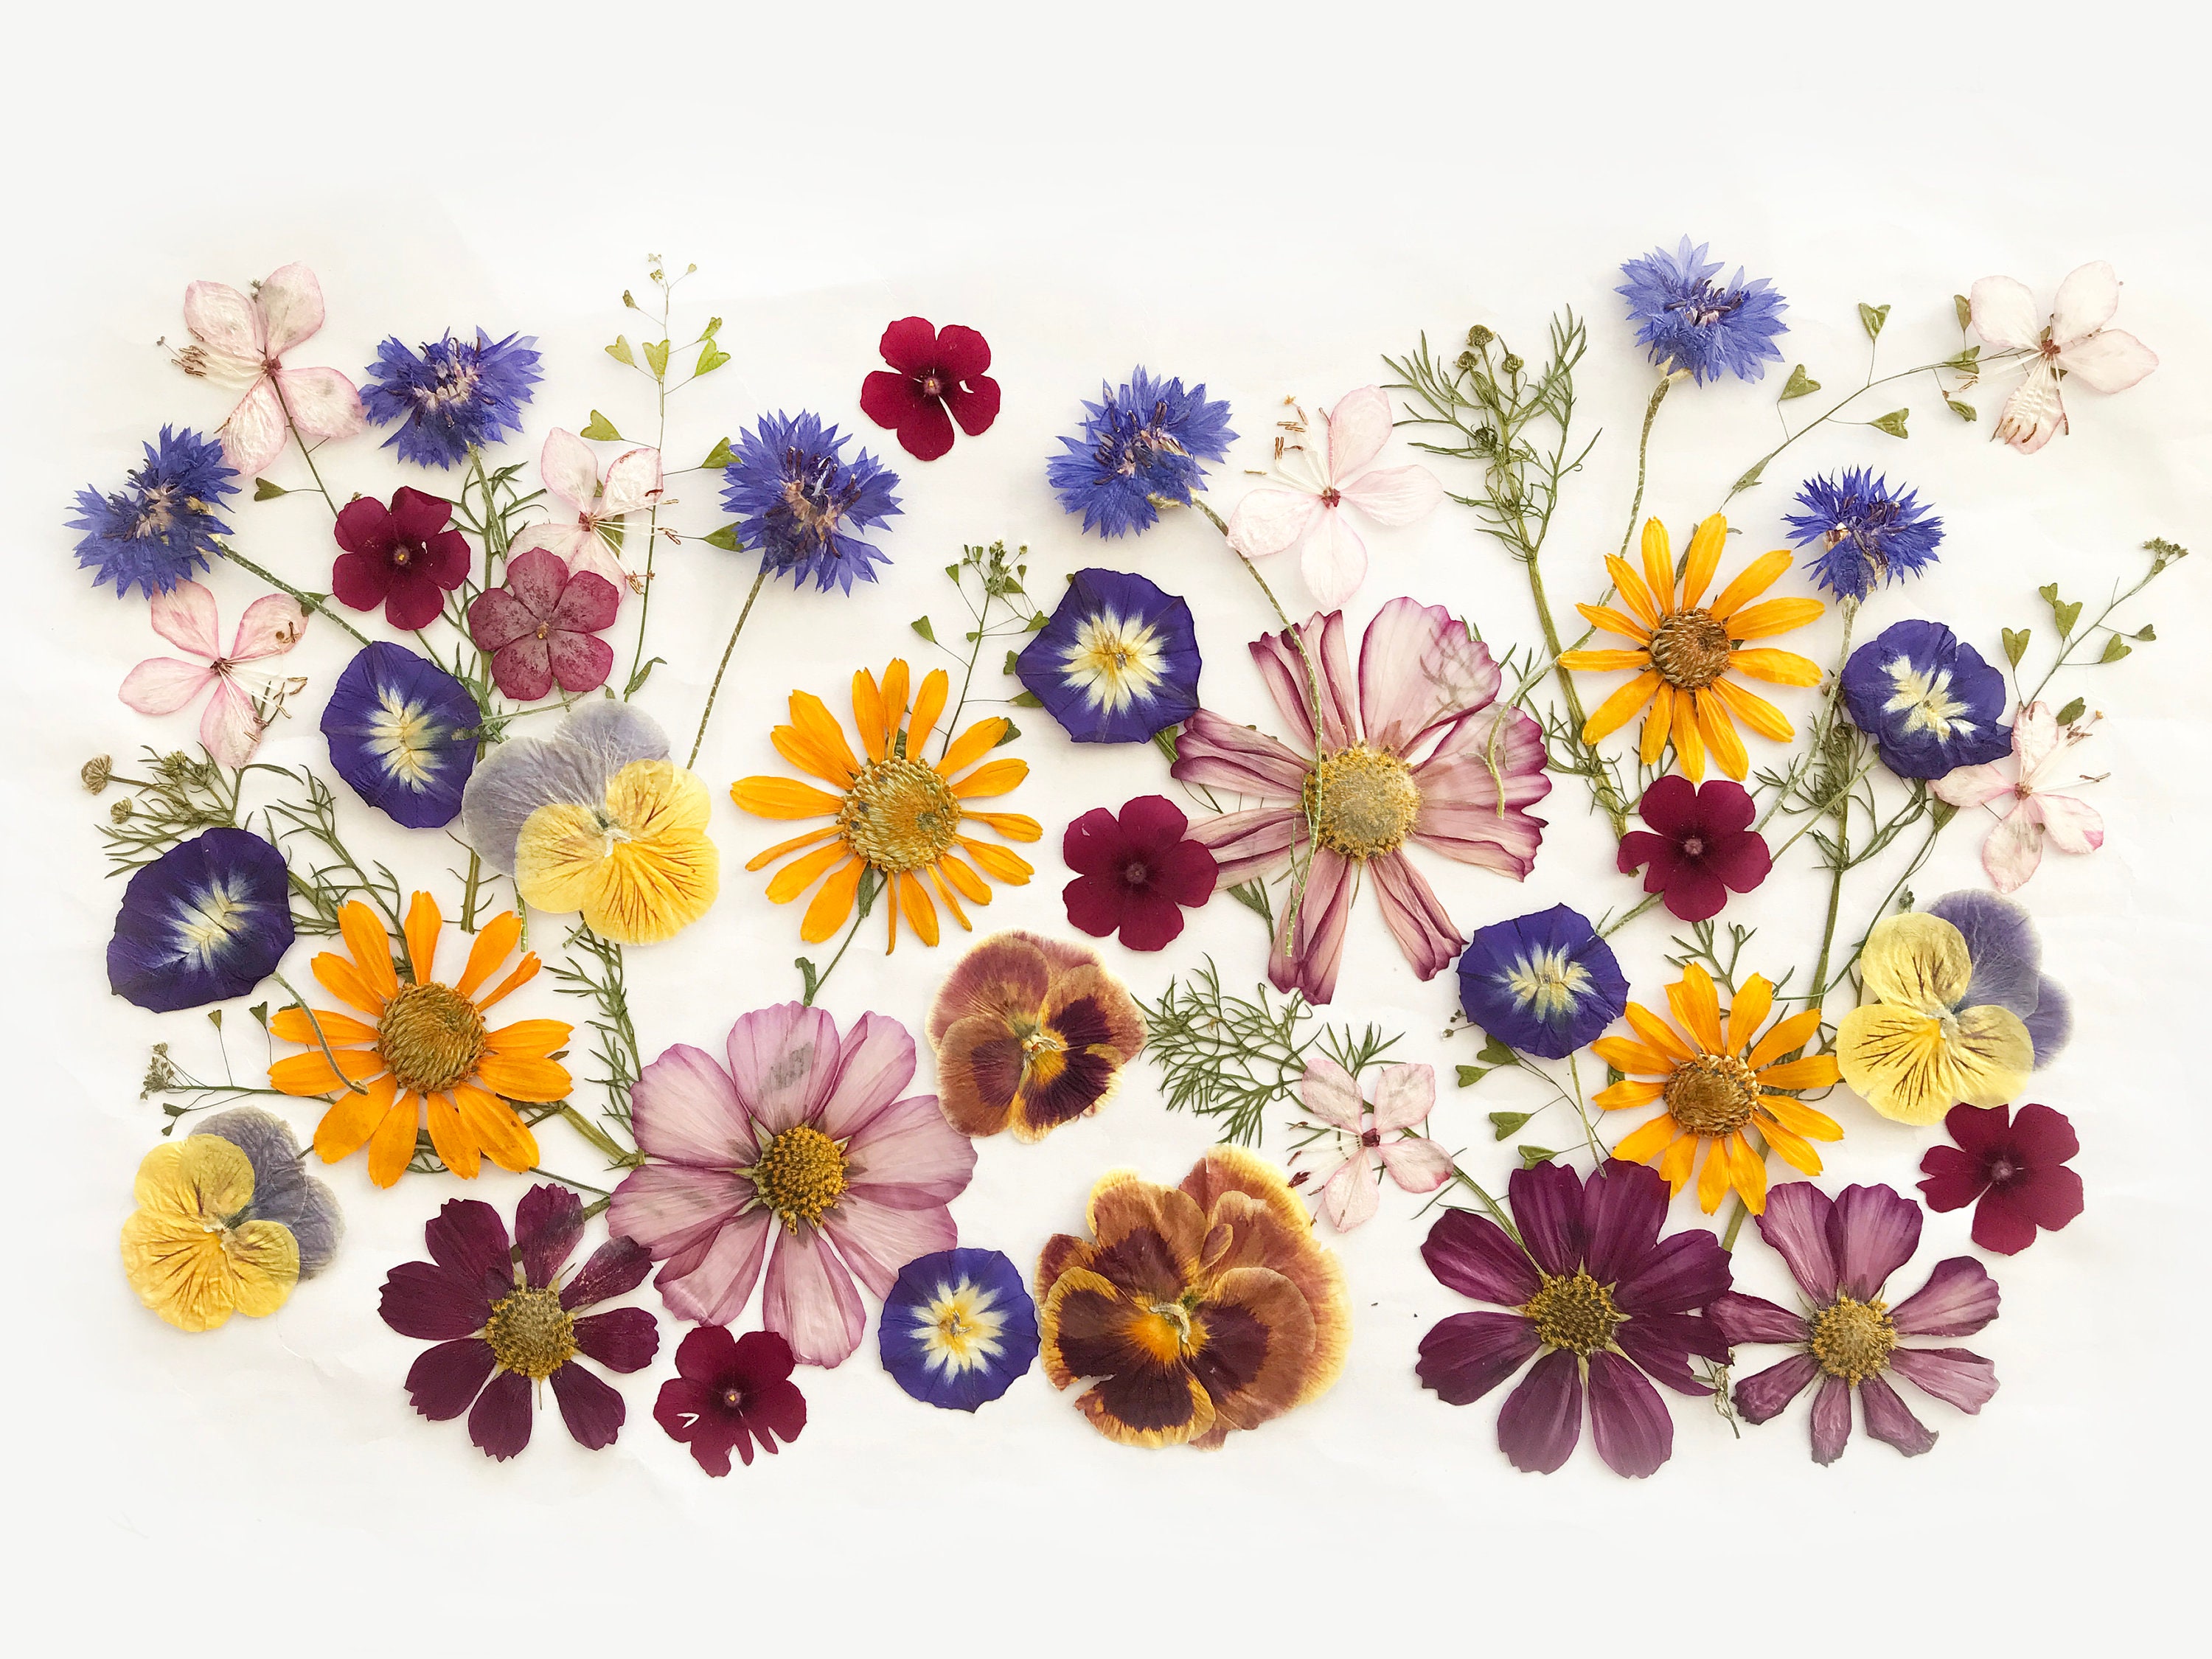 50 Mixed Pressed Flowers Edible Flowers for Cake Decorations, Crafts,  Flower Arts DF 047-6 